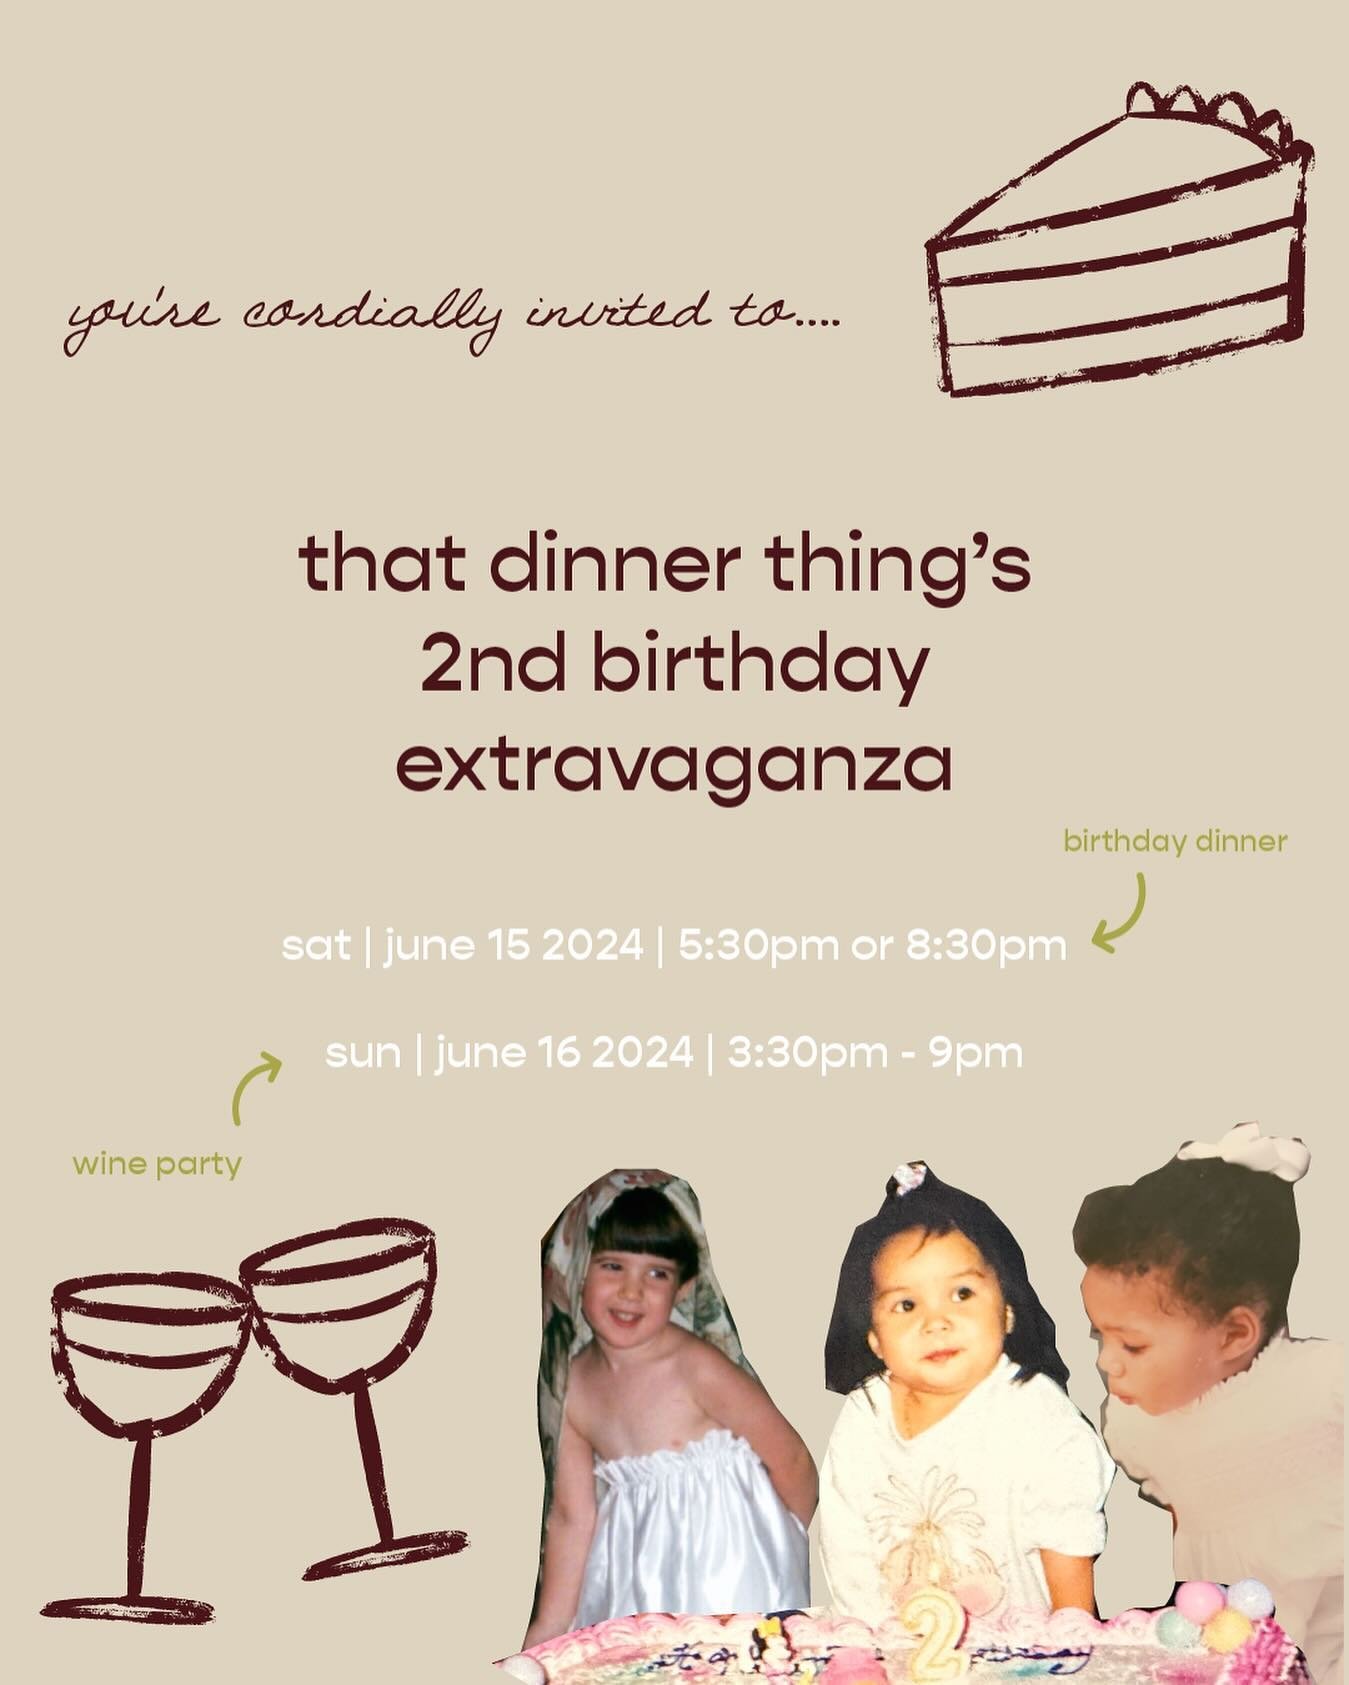 our june dinner things (or should we say birthday things?) are here! you&rsquo;re invited! 

🍽️ dinner on sat, june 15 at 5:30pm or 8:30pm 
this is our classic dinner thing but with a birthday twist. tickets lottery opens in june. date to come. 

🍷